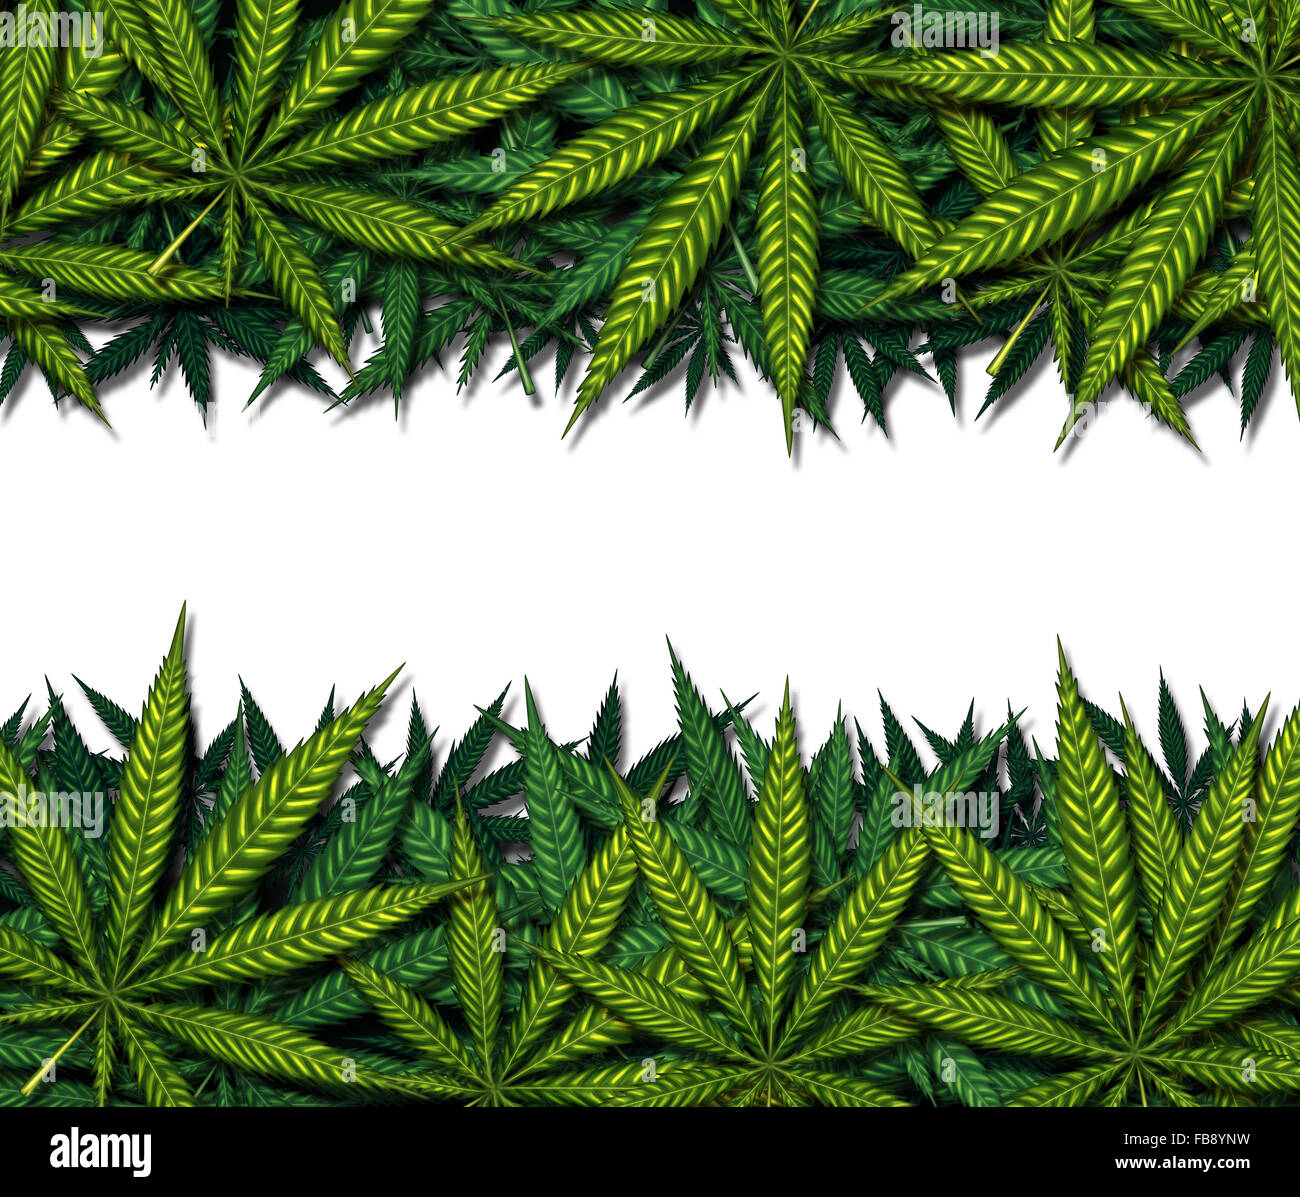 Marijuana border design on a white background as a symbol for medicinal pot or medical weed as a group of green leaves as a cannabis drug communication symbol. Stock Photo